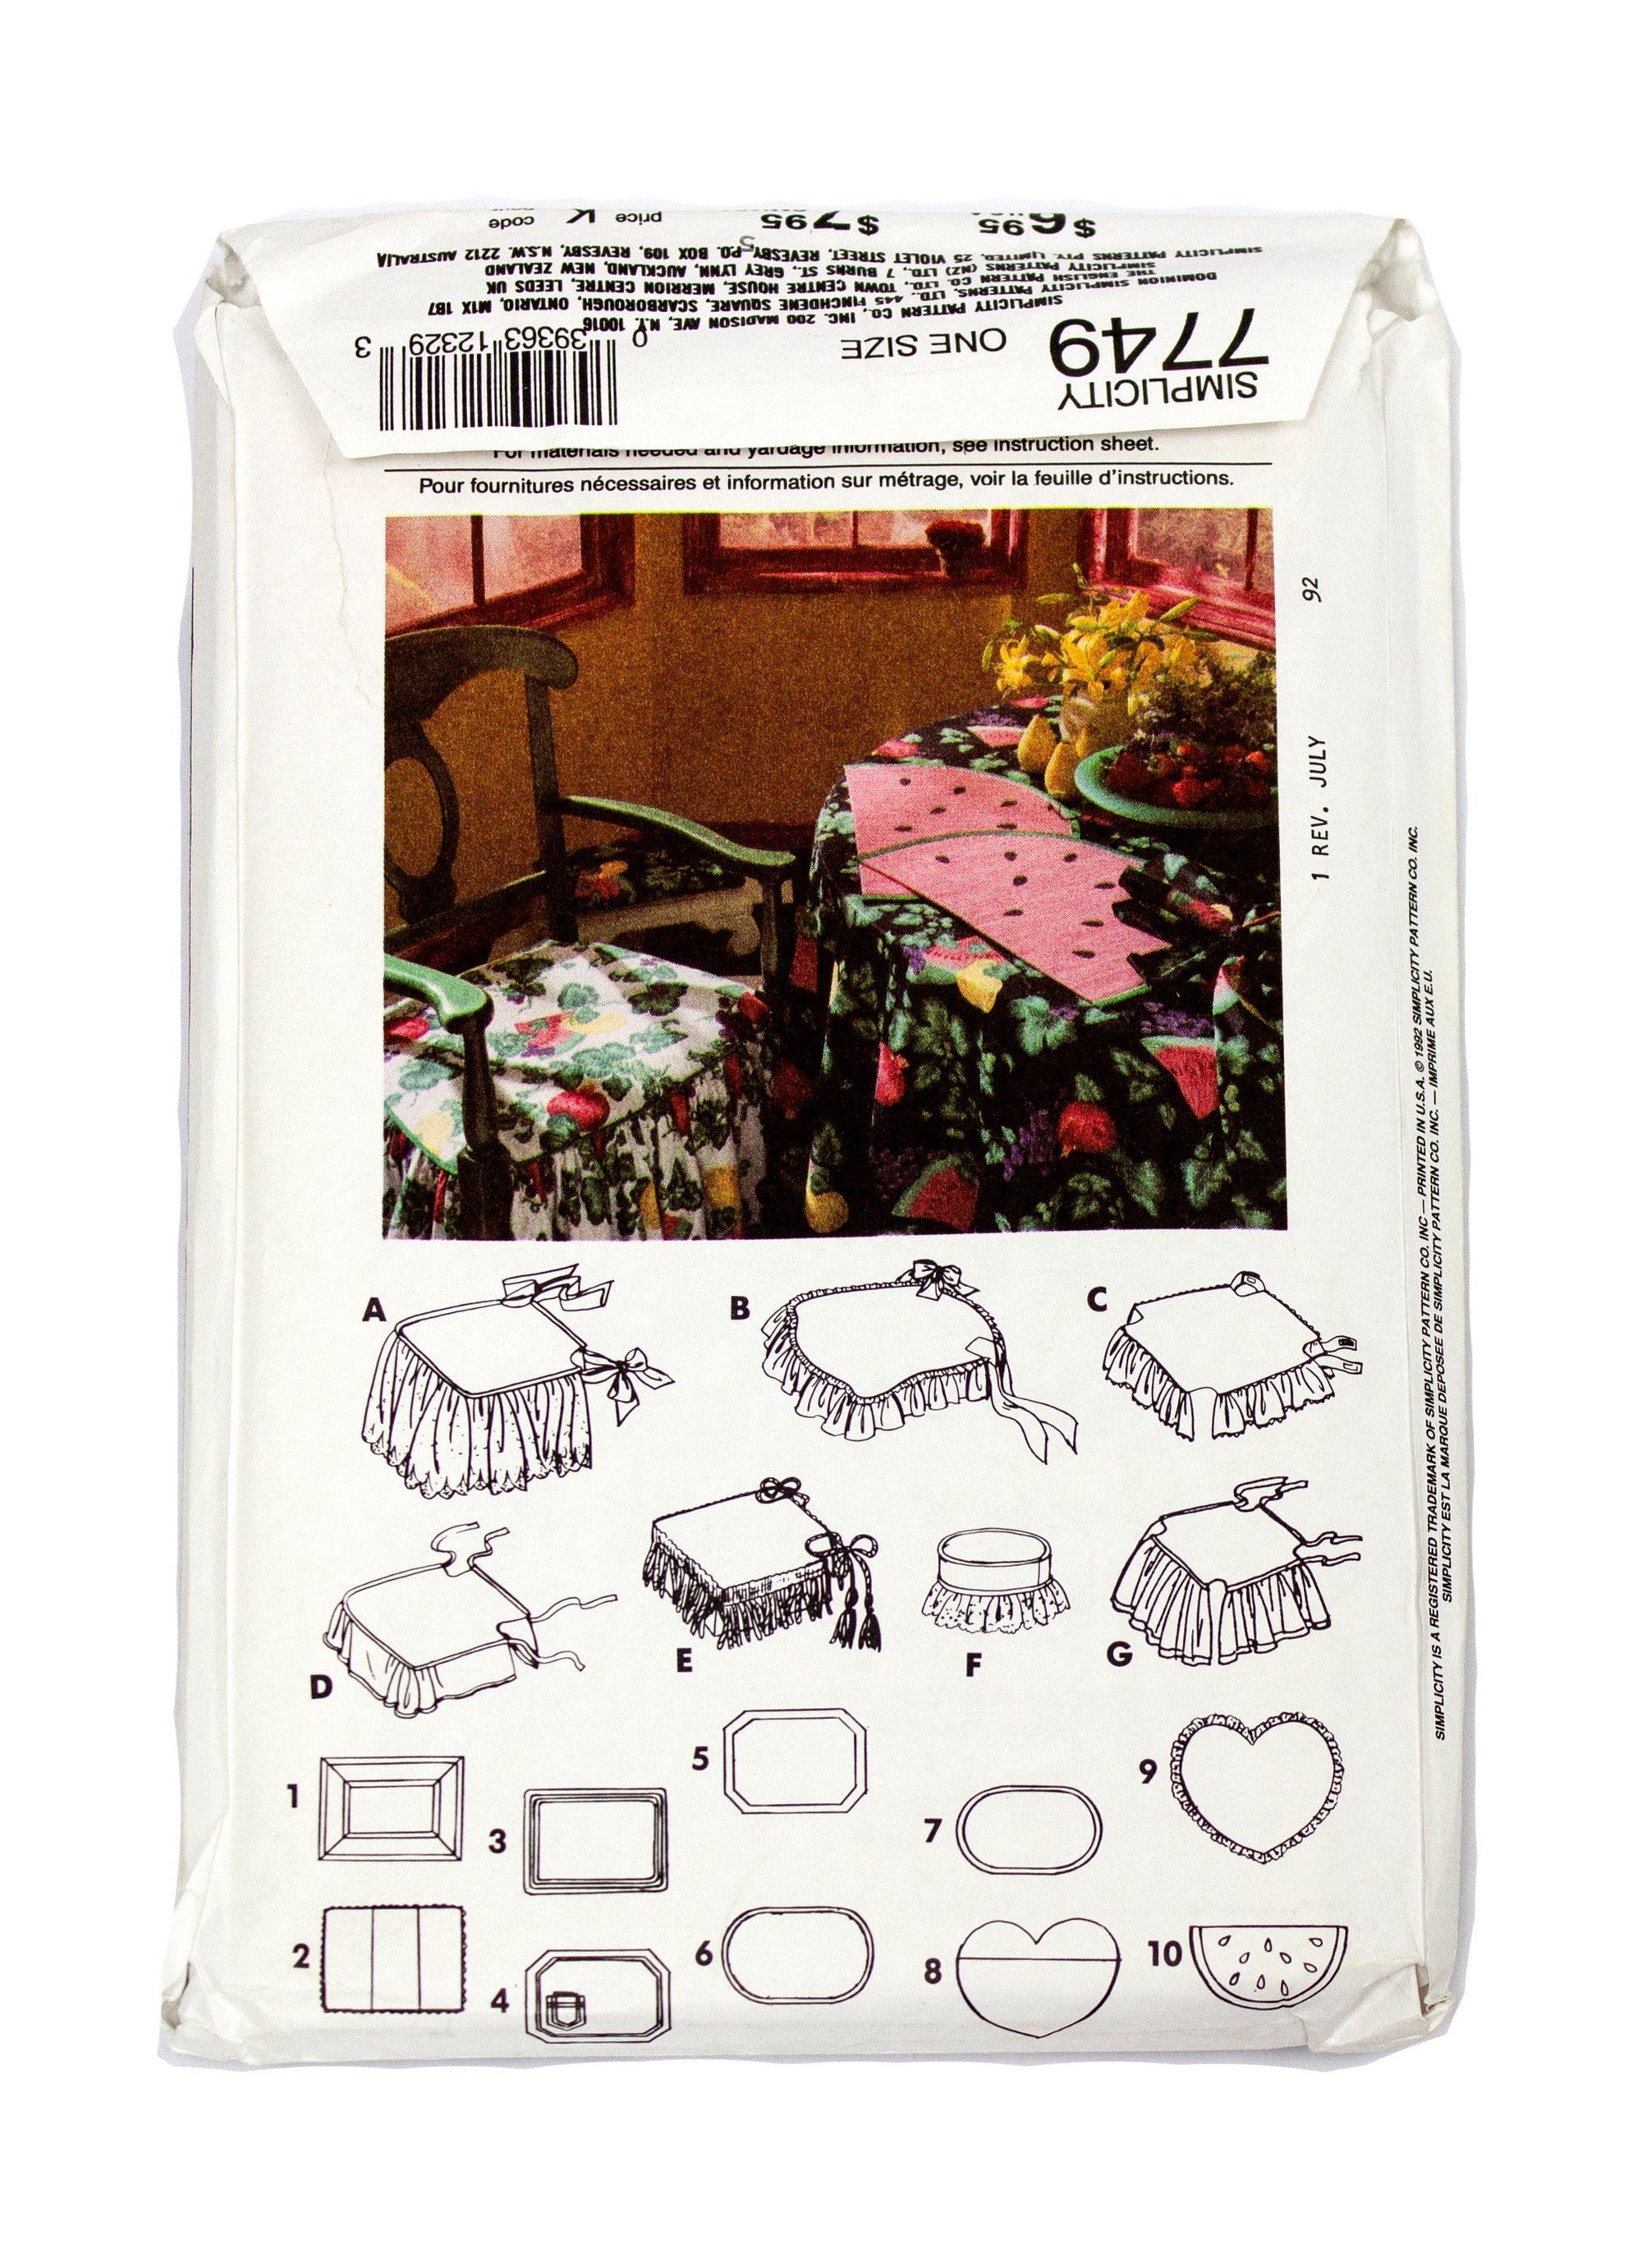 Simplicity 7749 Chair Pad, Stool Cover, and Placemats Uncut - One Size